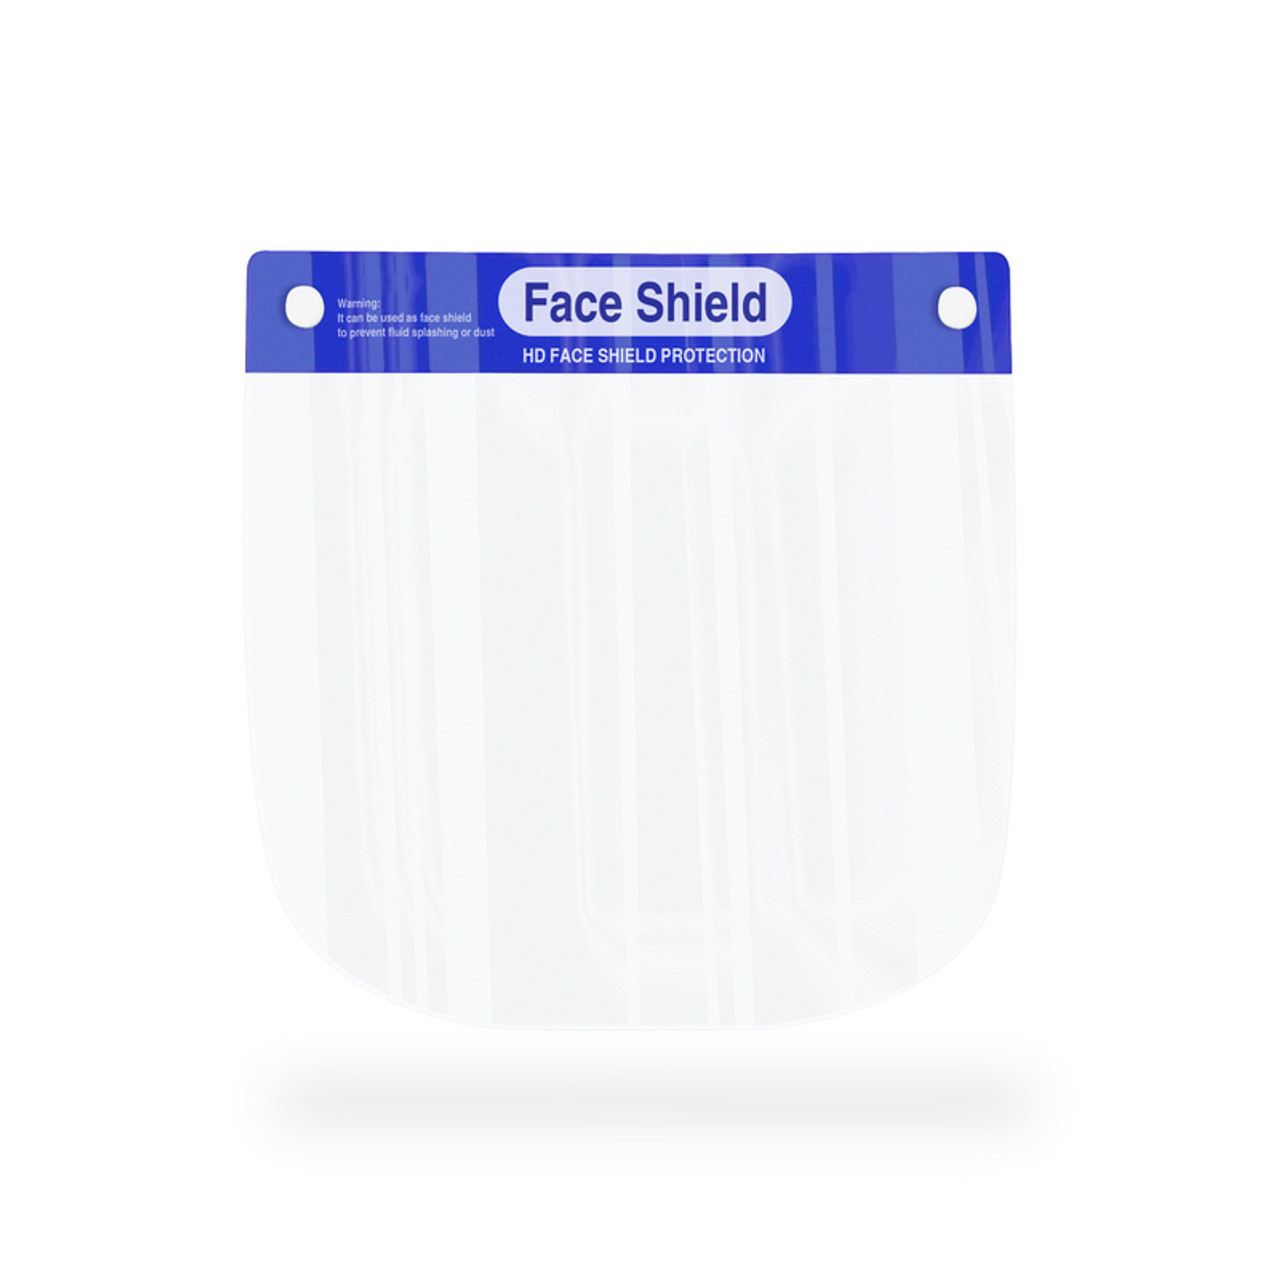 Order a Sample - Adjustable Transparent Face Shield L:12.6 x W:8.7in